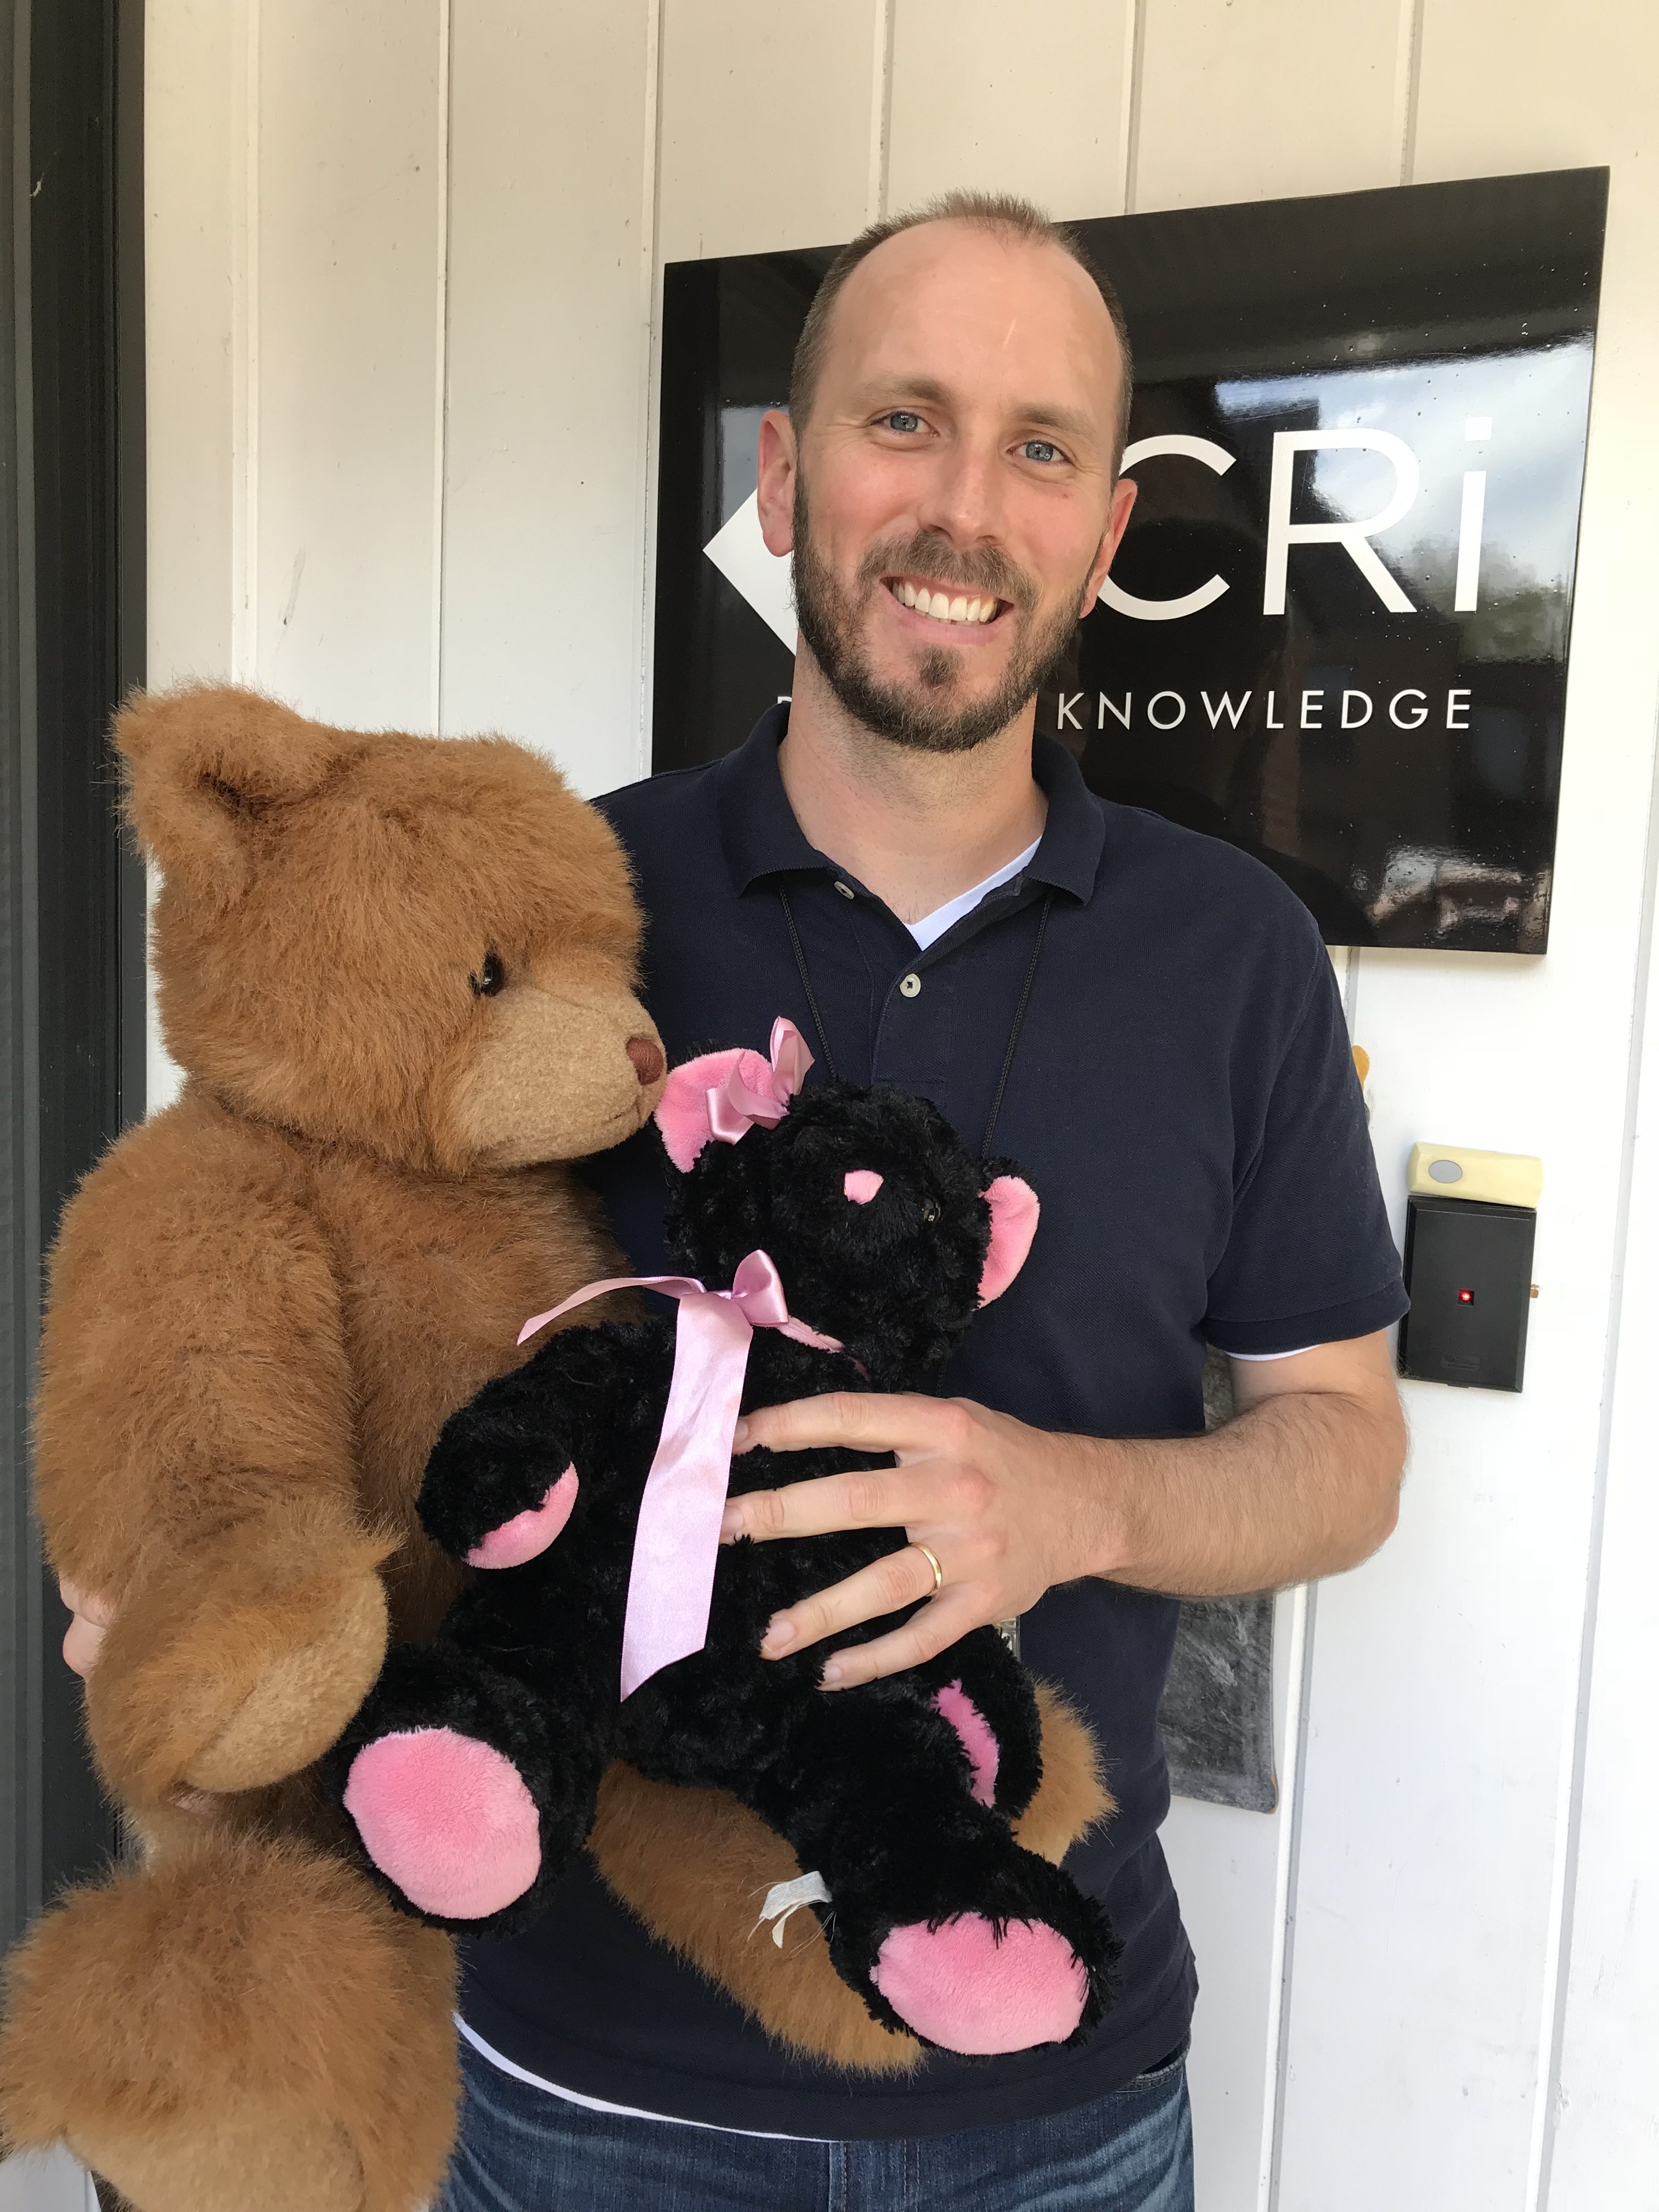 Andrew Greets Every GA-CCRi Visitor with a Teddy Bear!